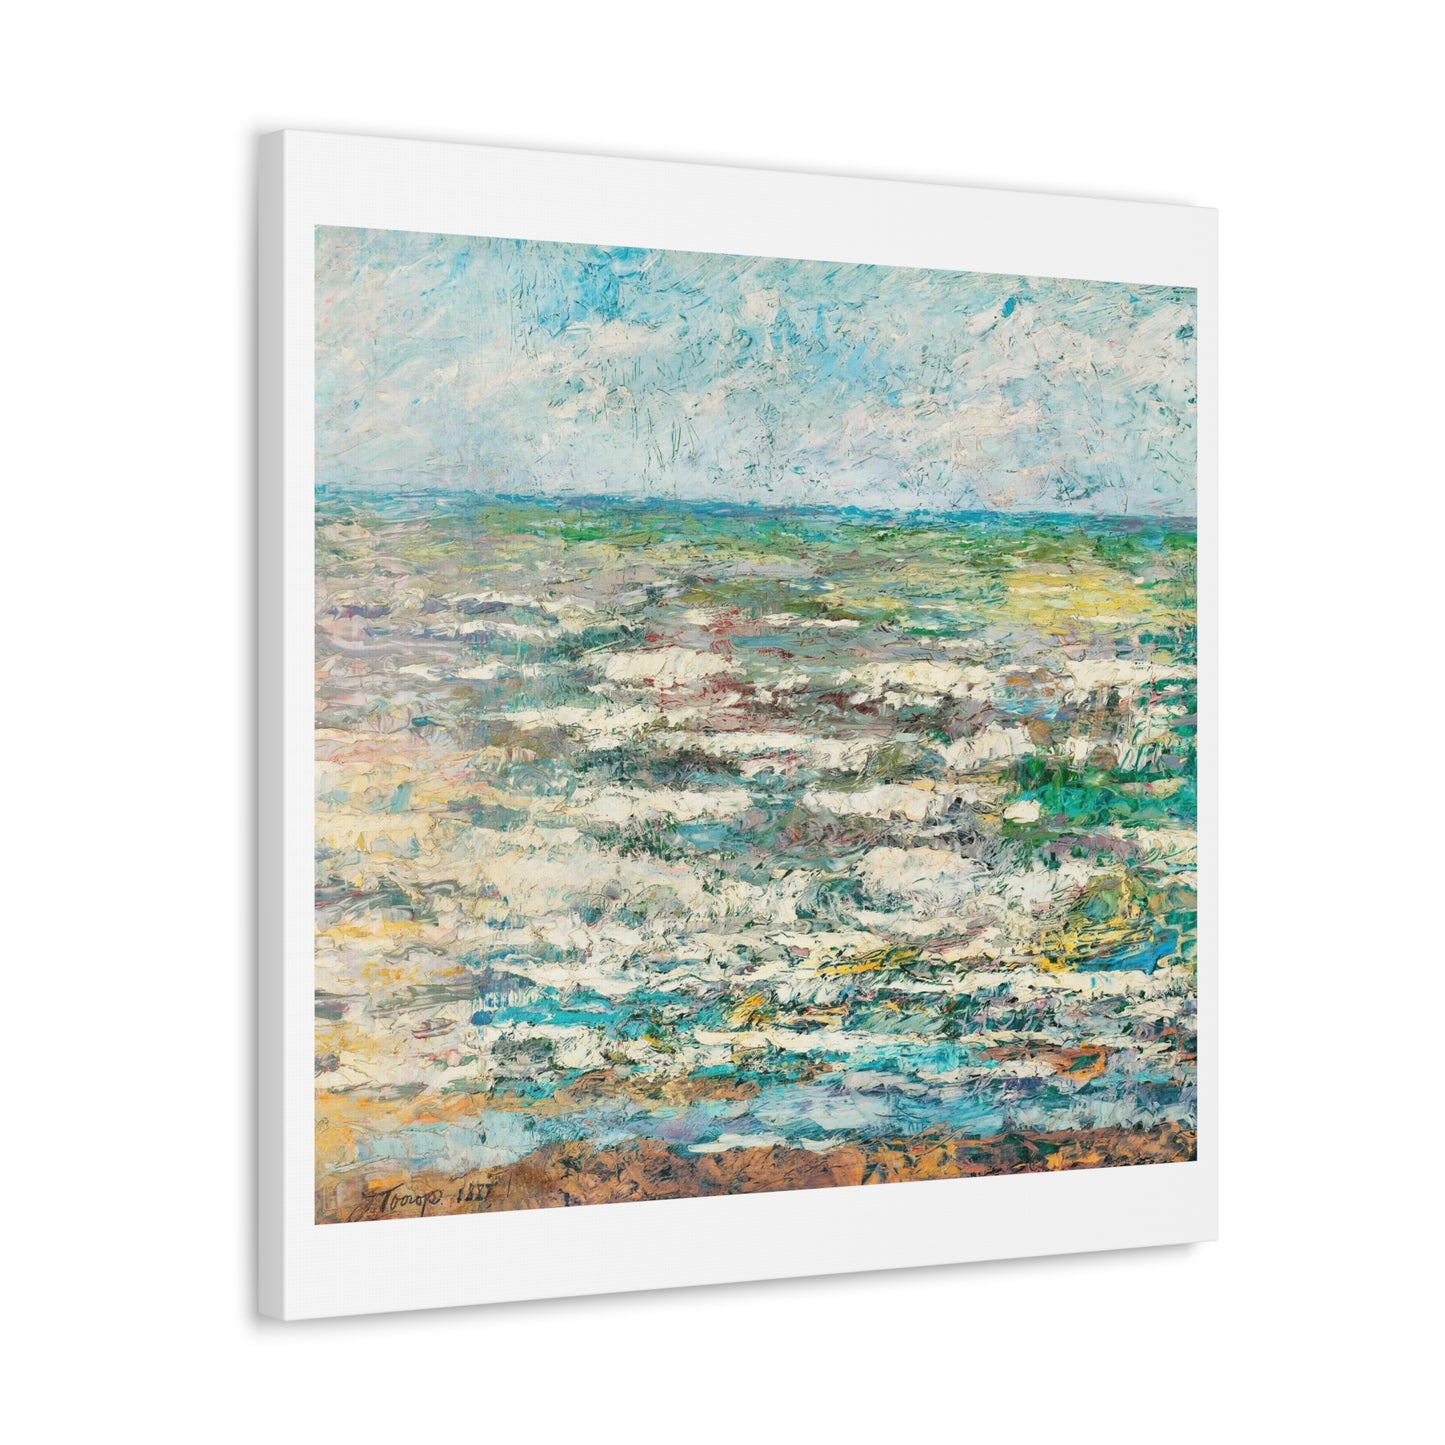 The Sea (1887) by Jan Toorop, from the Original, Print on Canvas